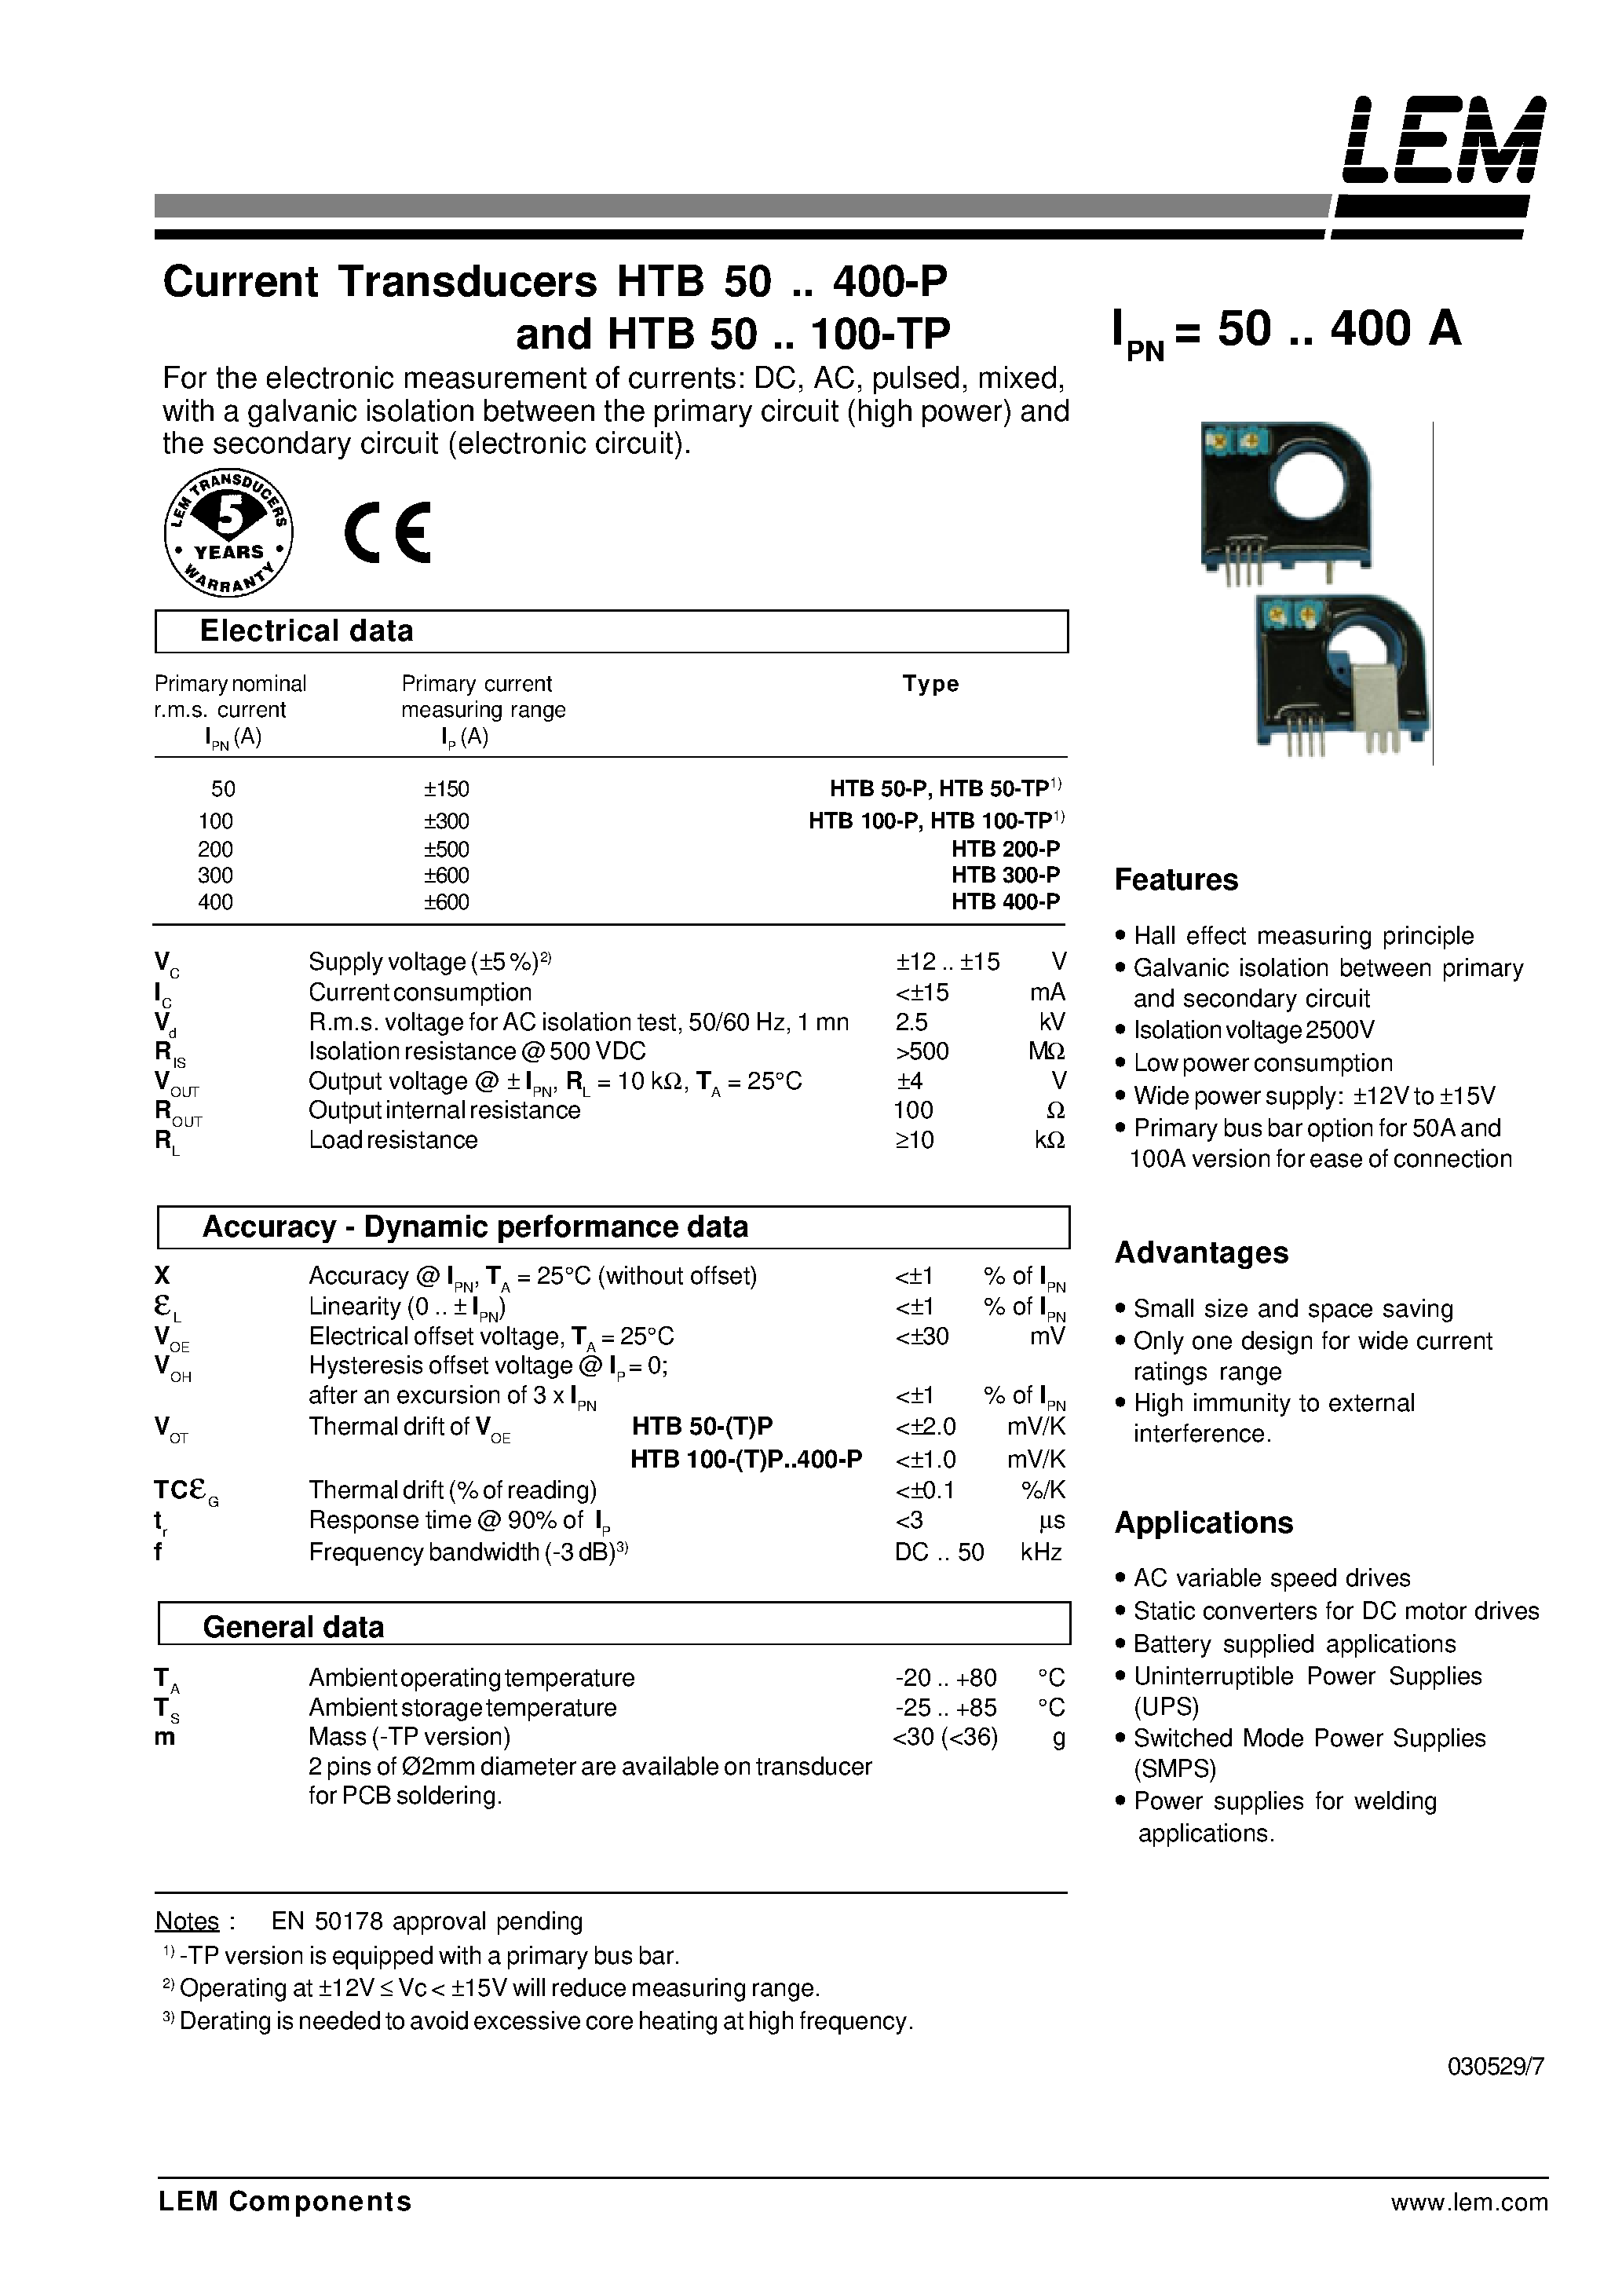 Datasheet HTB200-P - Current Transducers HTB 50~400-P and HTB 50~100-TP page 1